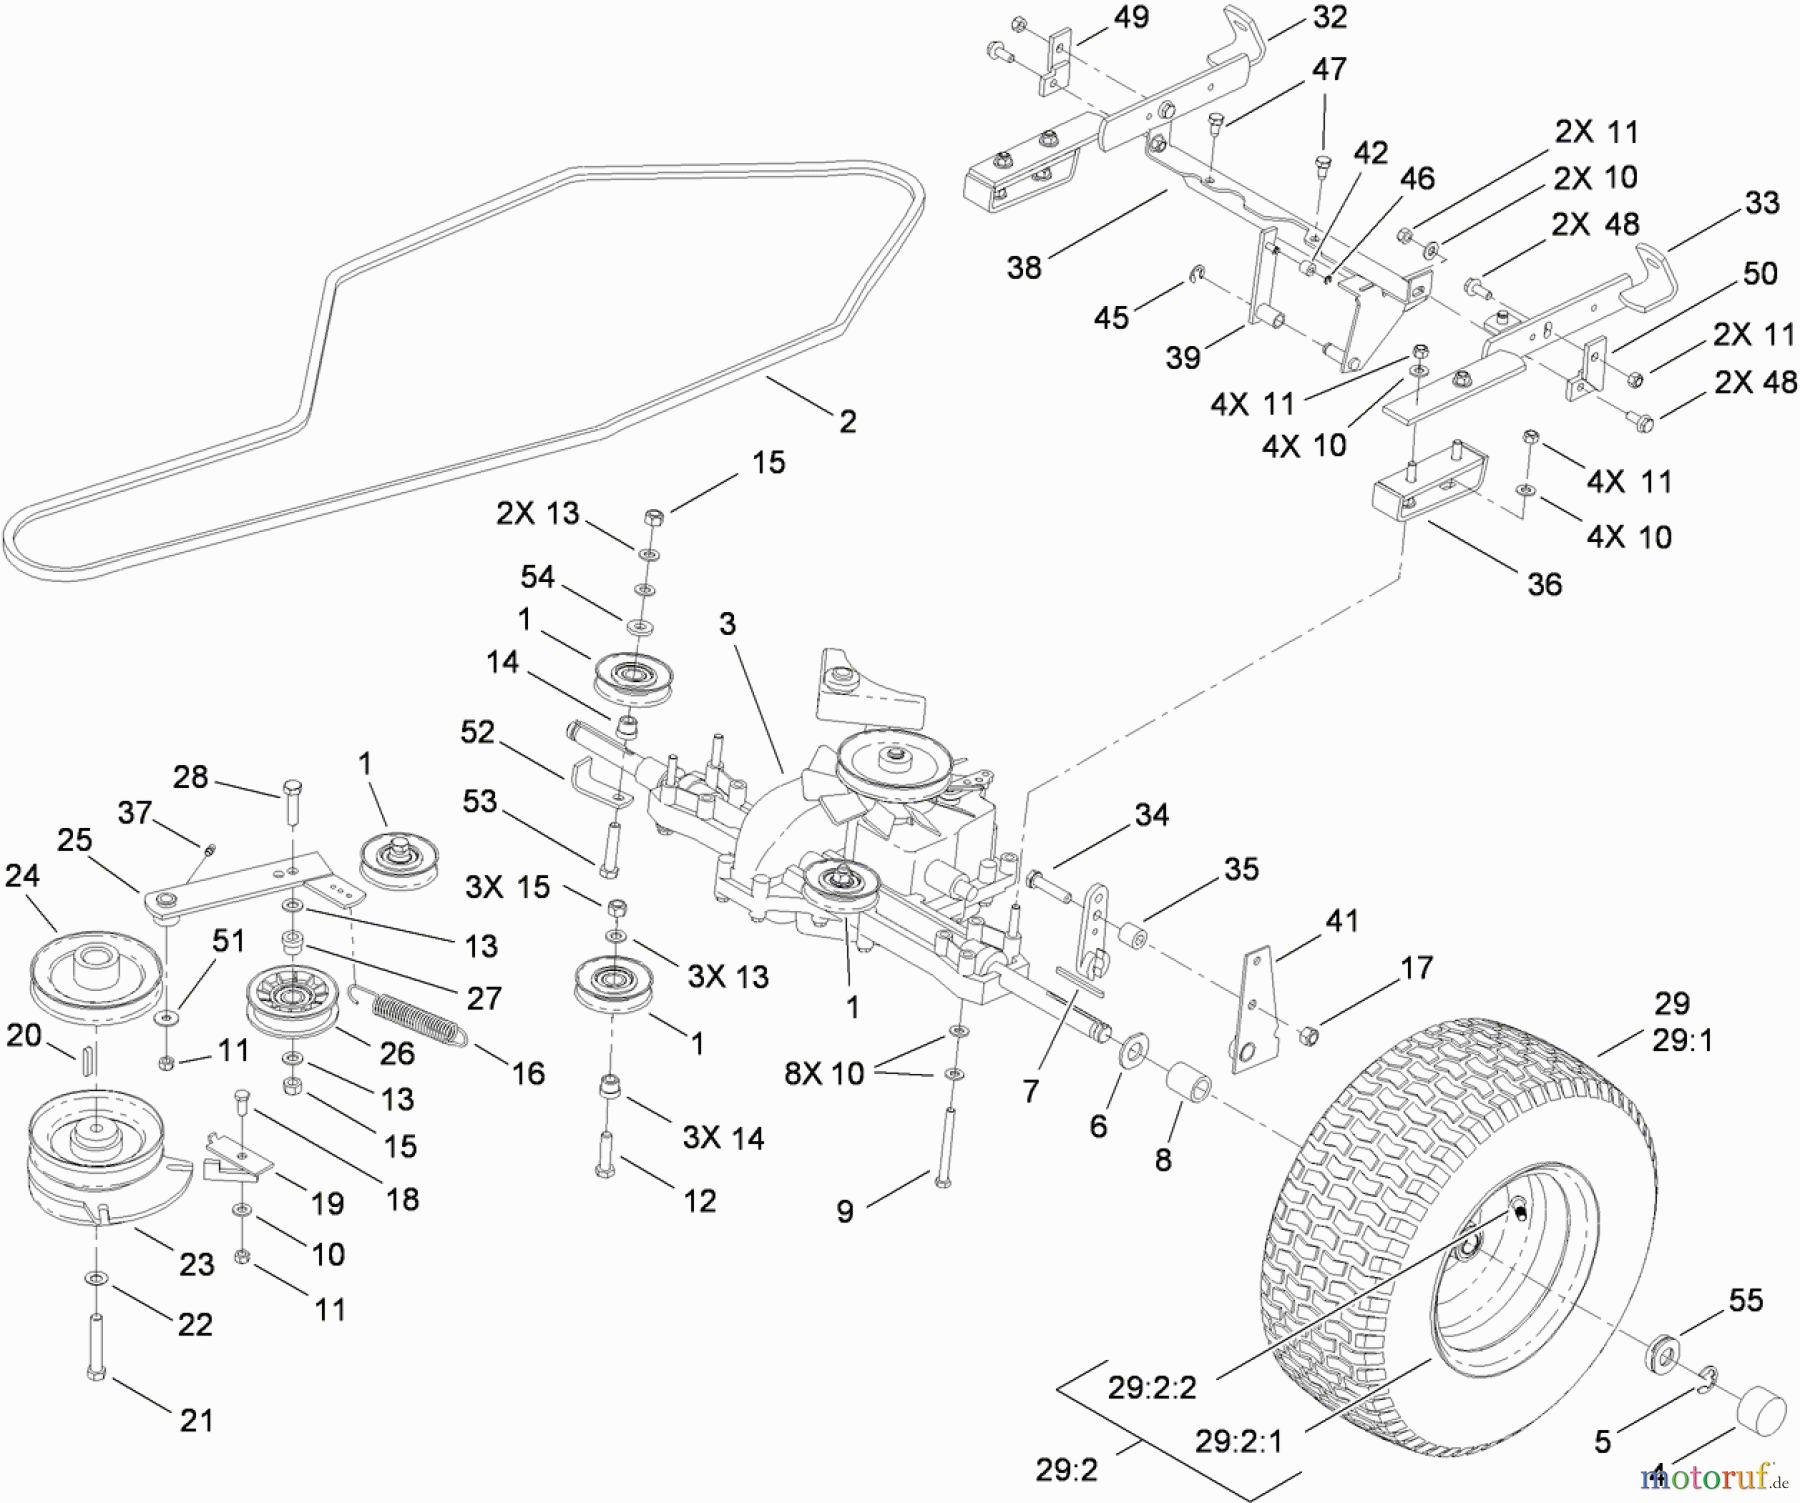  Toro Neu Mowers, Lawn & Garden Tractor Seite 1 74573 (DH 200) - Toro DH 200 Lawn Tractor, 2010 (310000001-310999999) TRANSMISSION DRIVE ASSEMBLY